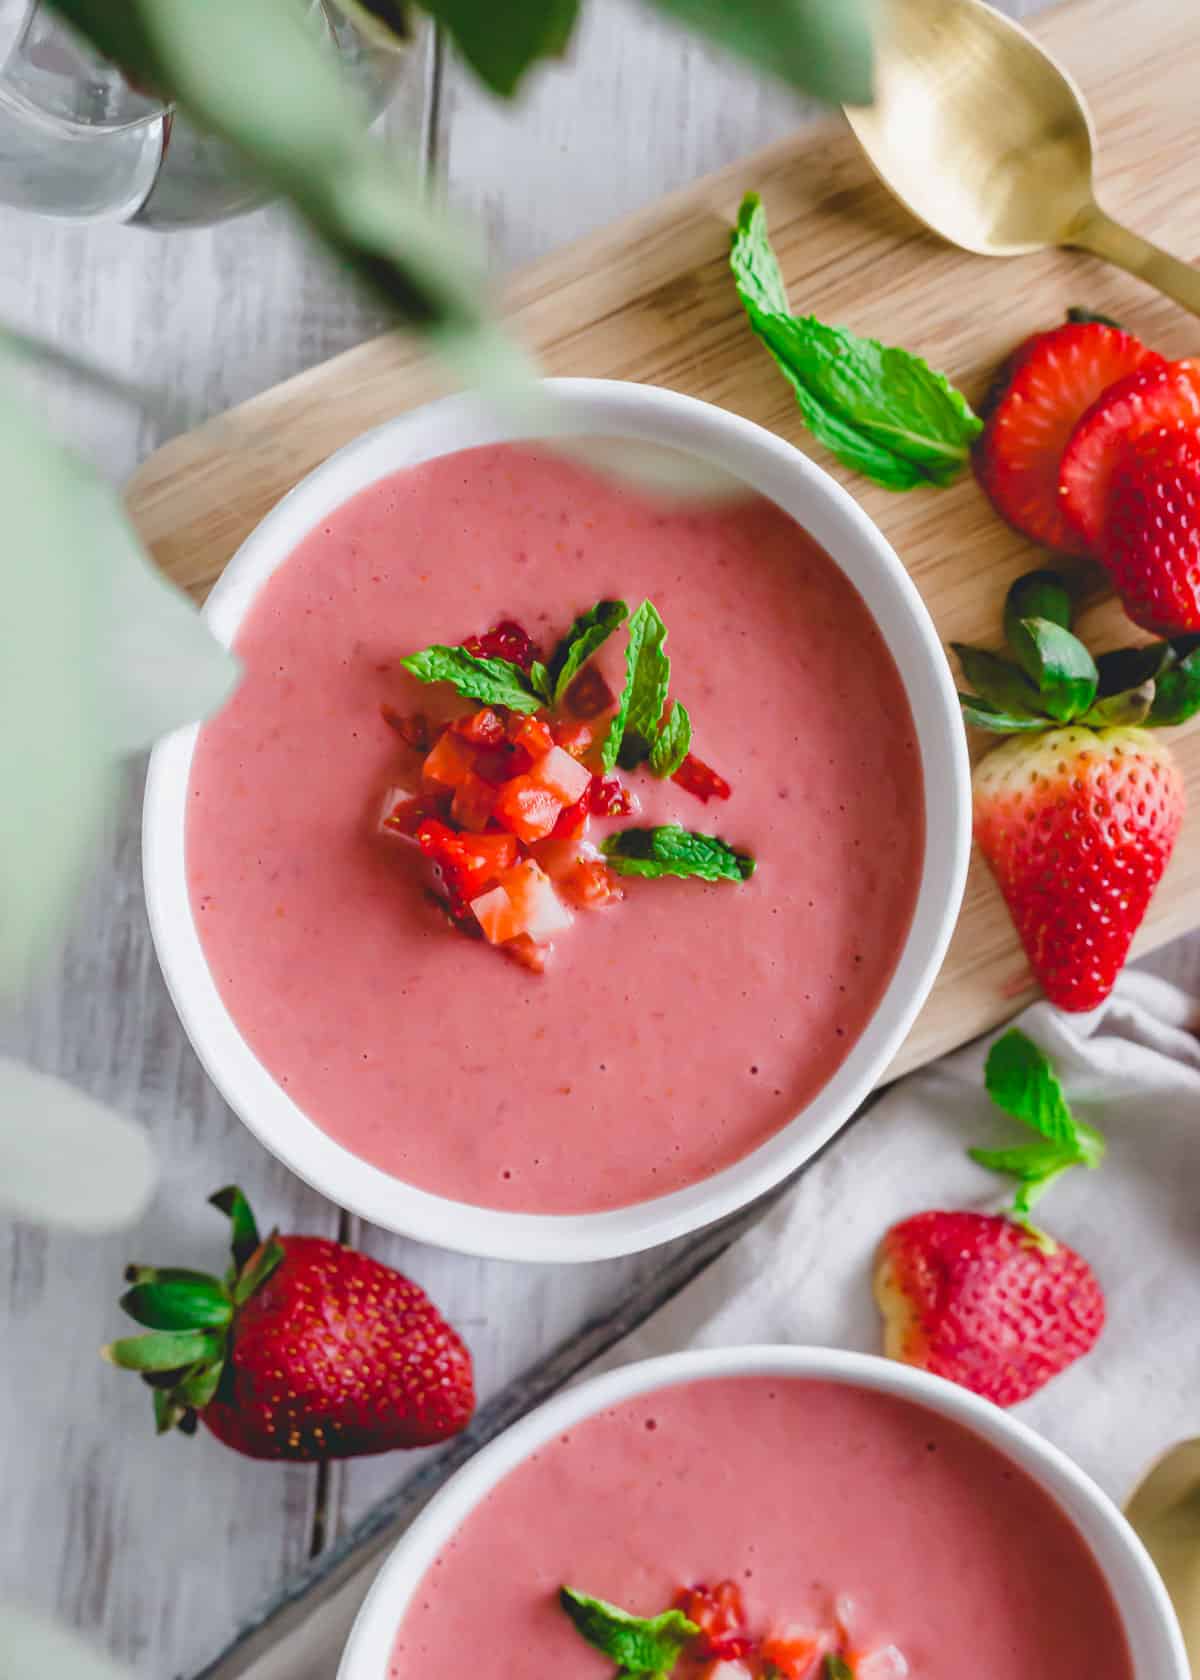 Easy blender cold strawberry soup with strawberry and mint garnish on a white surface.